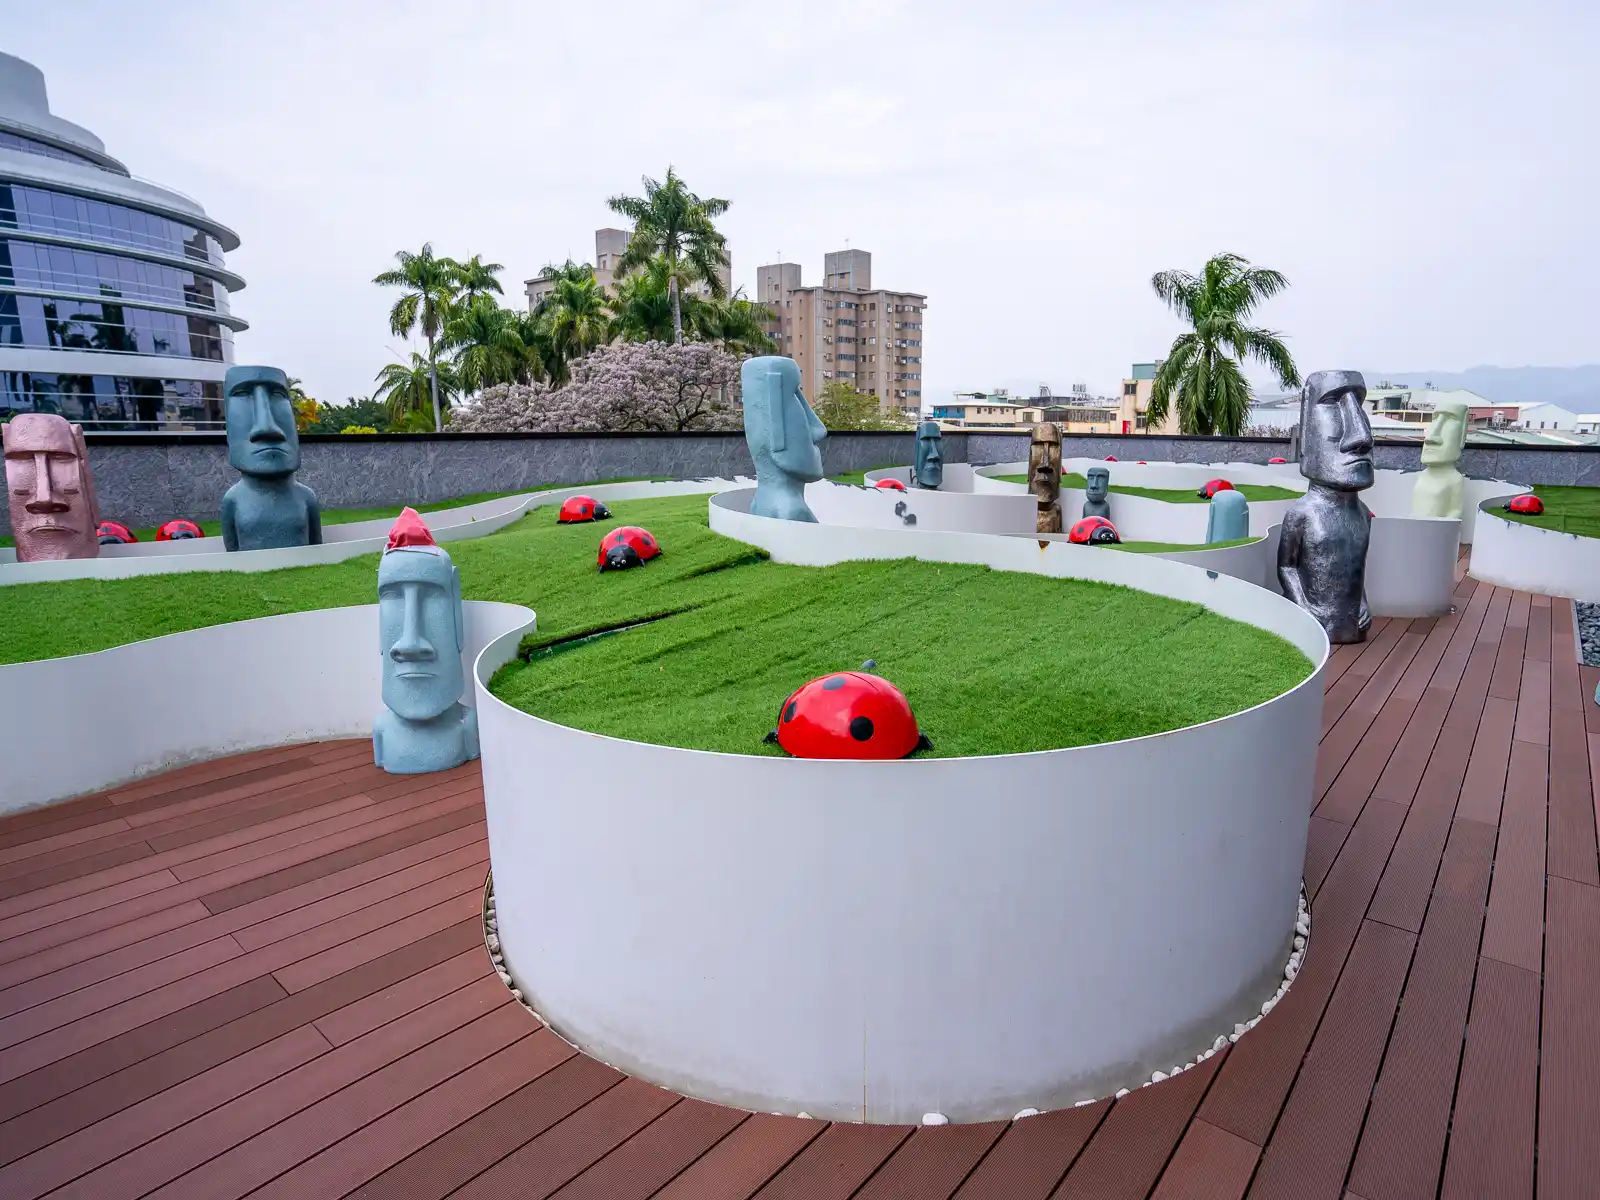 The rooftop garden features fake grass, ladybugs, and head statues like the ones from Easter Island.